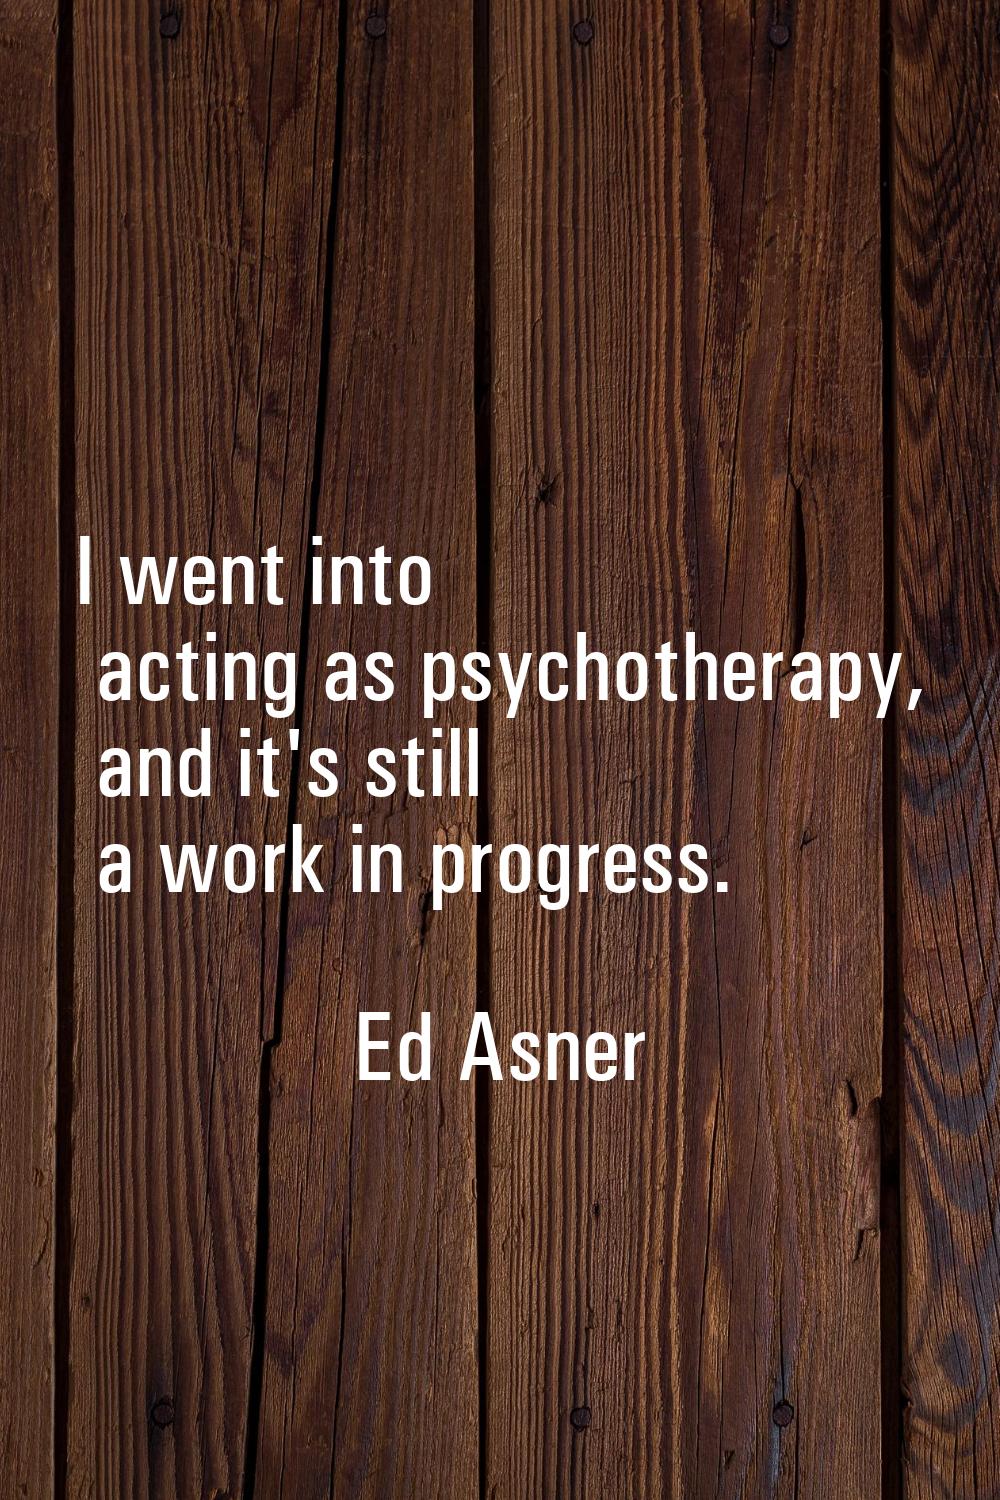 I went into acting as psychotherapy, and it's still a work in progress.